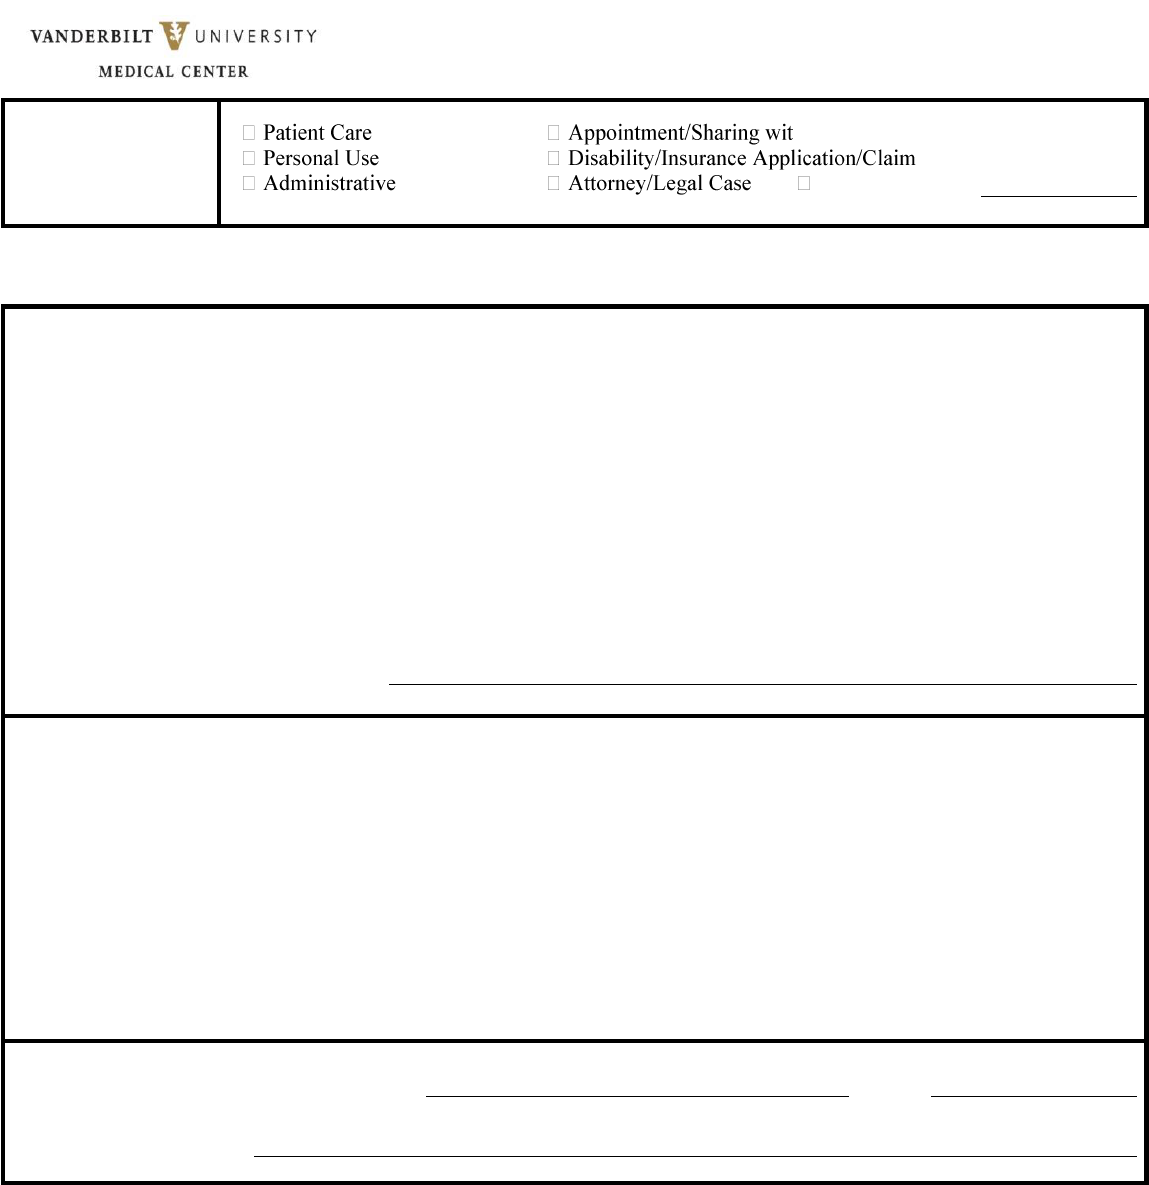 Tennessee Medical Release Form 2